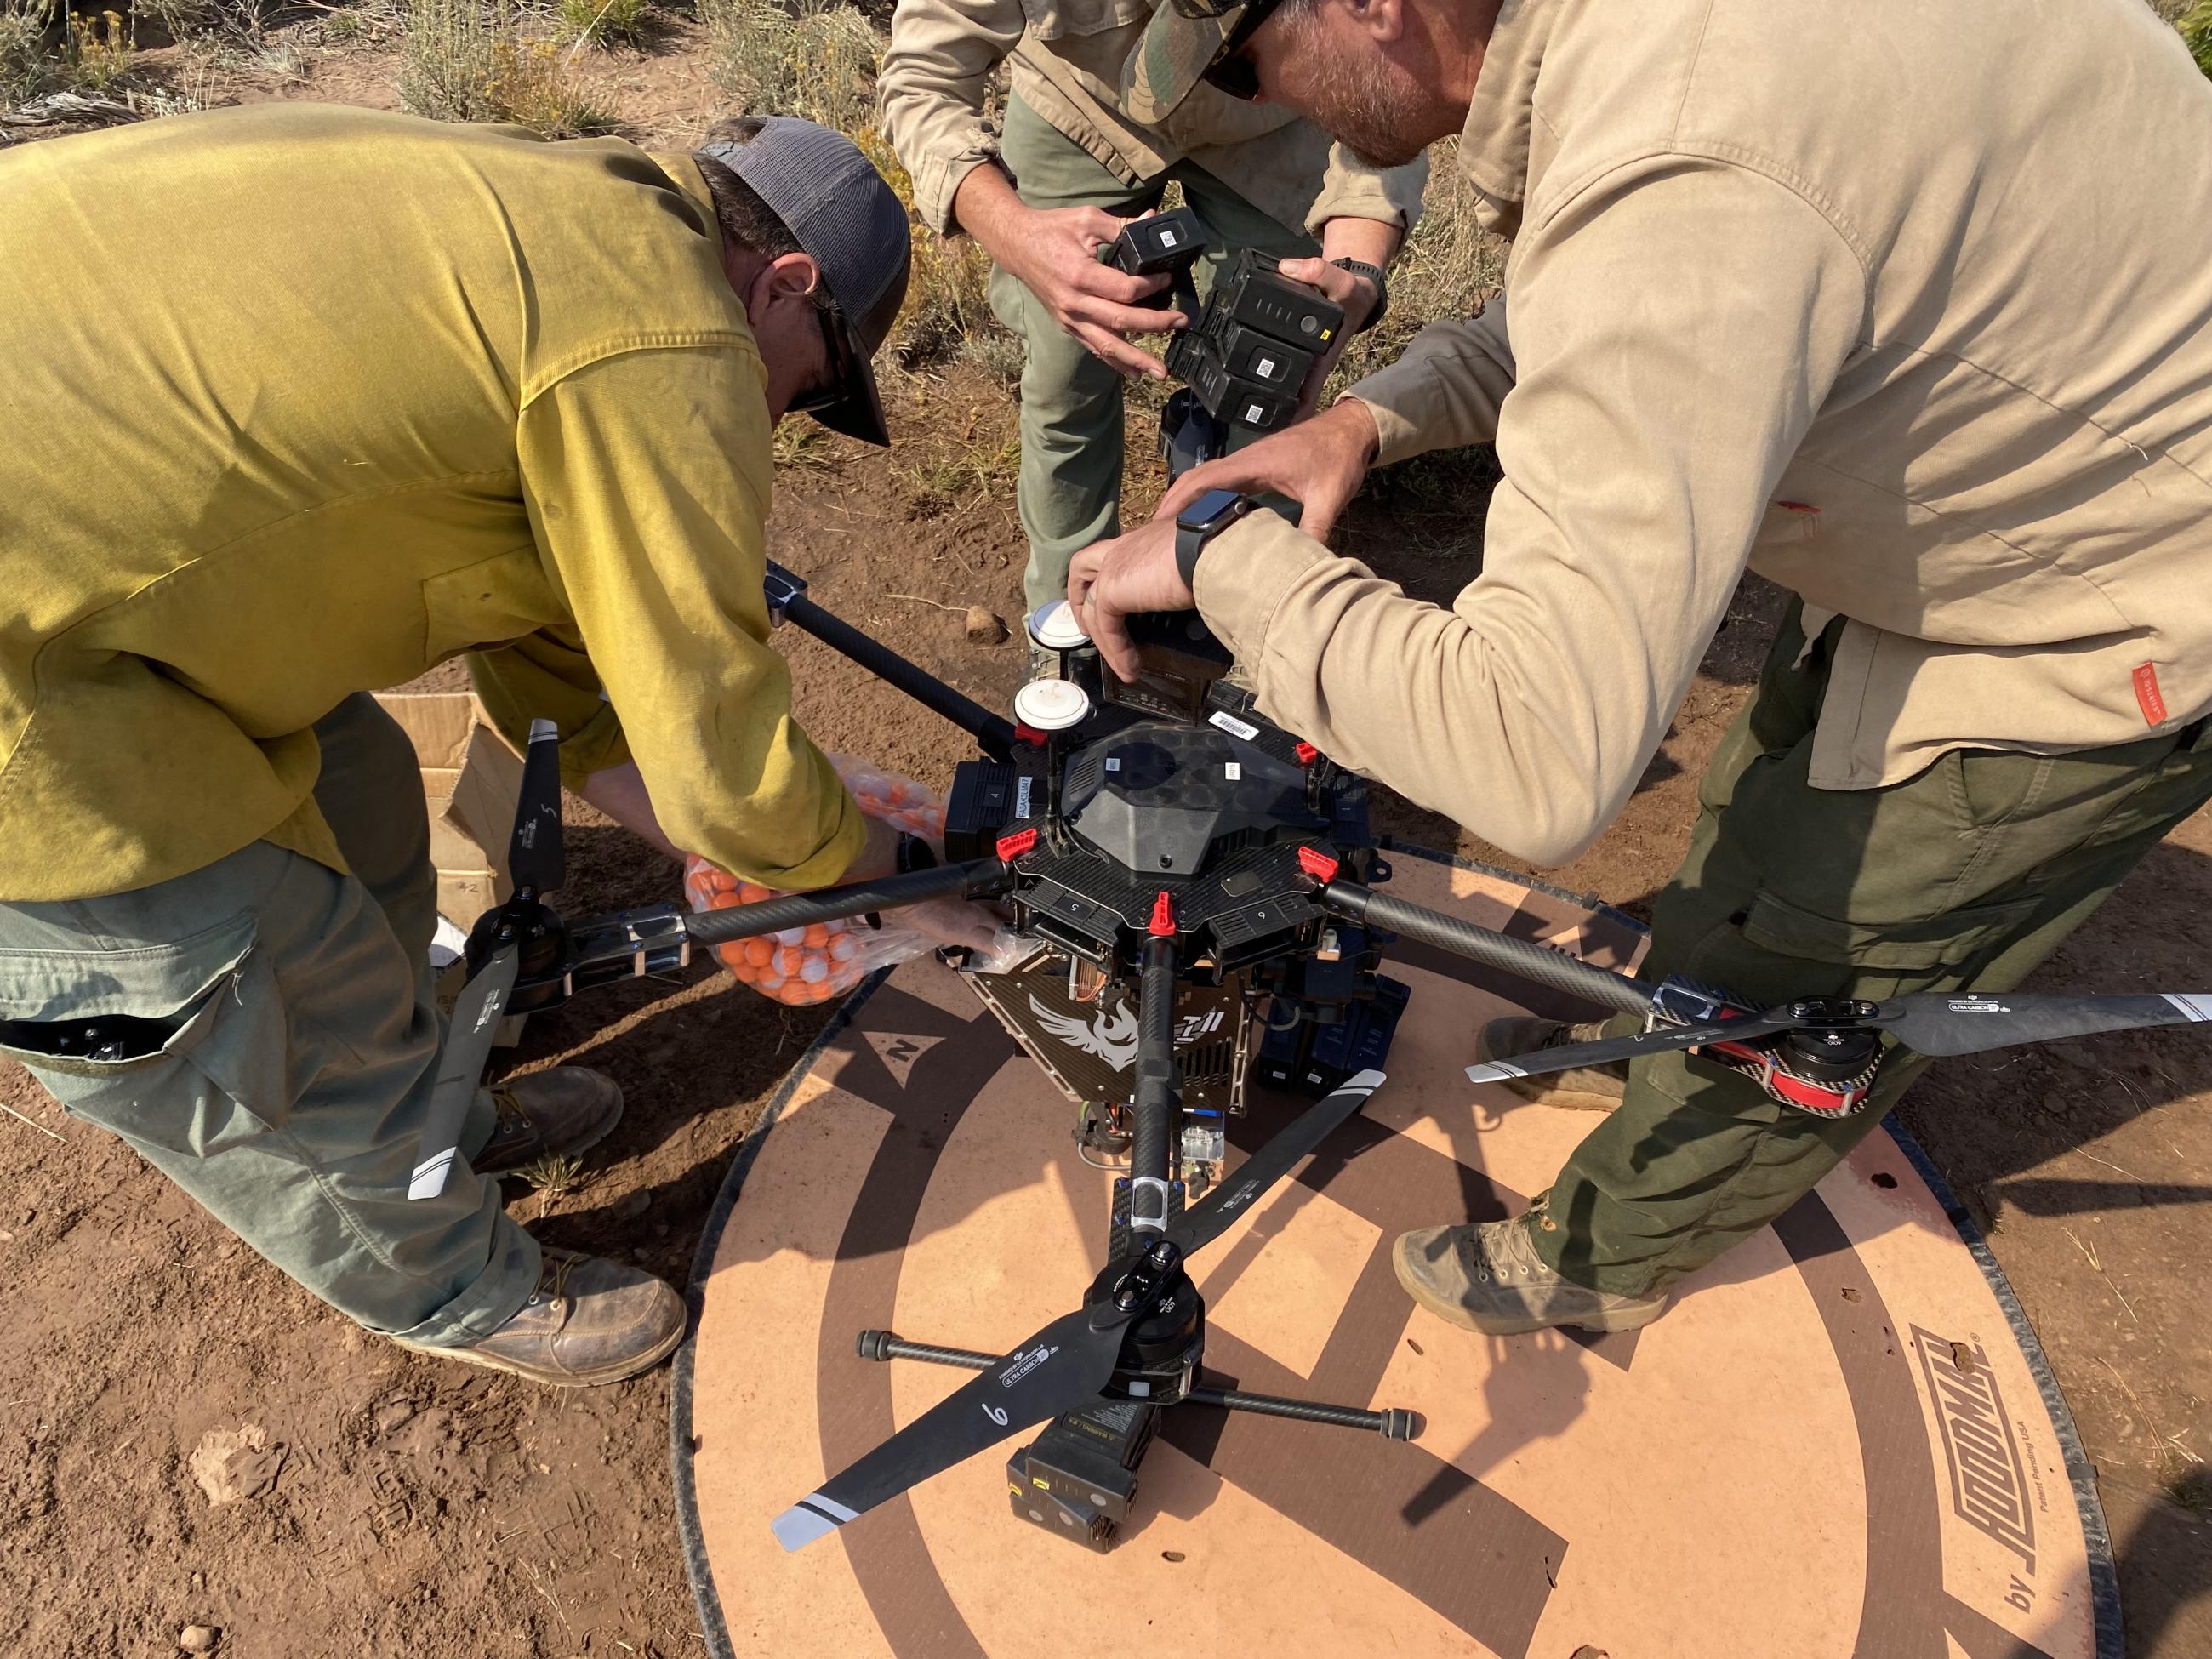 Image of firefighters reloading the UAS drone for aerial ignition operations, changing batteries and adding dragon eyes to hopper basket.